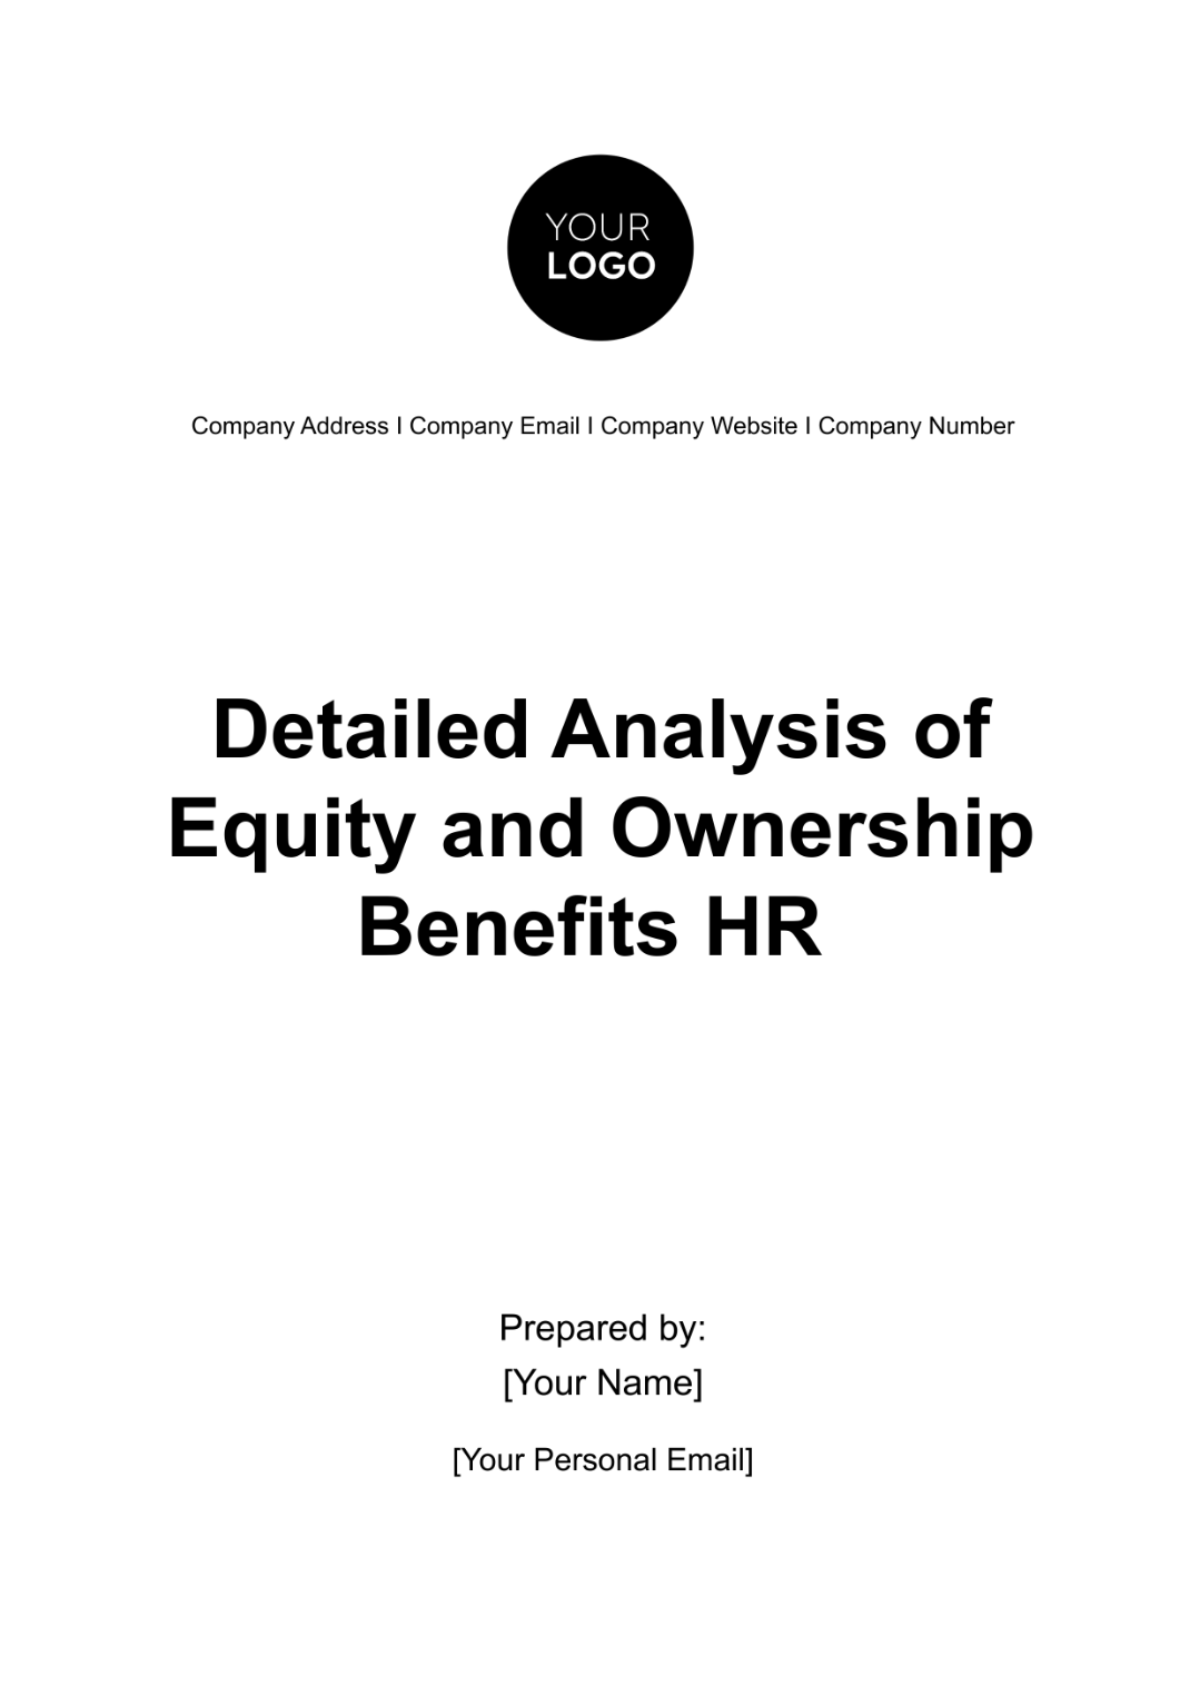 Detailed Analysis of Equity and Ownership Benefits HR Template